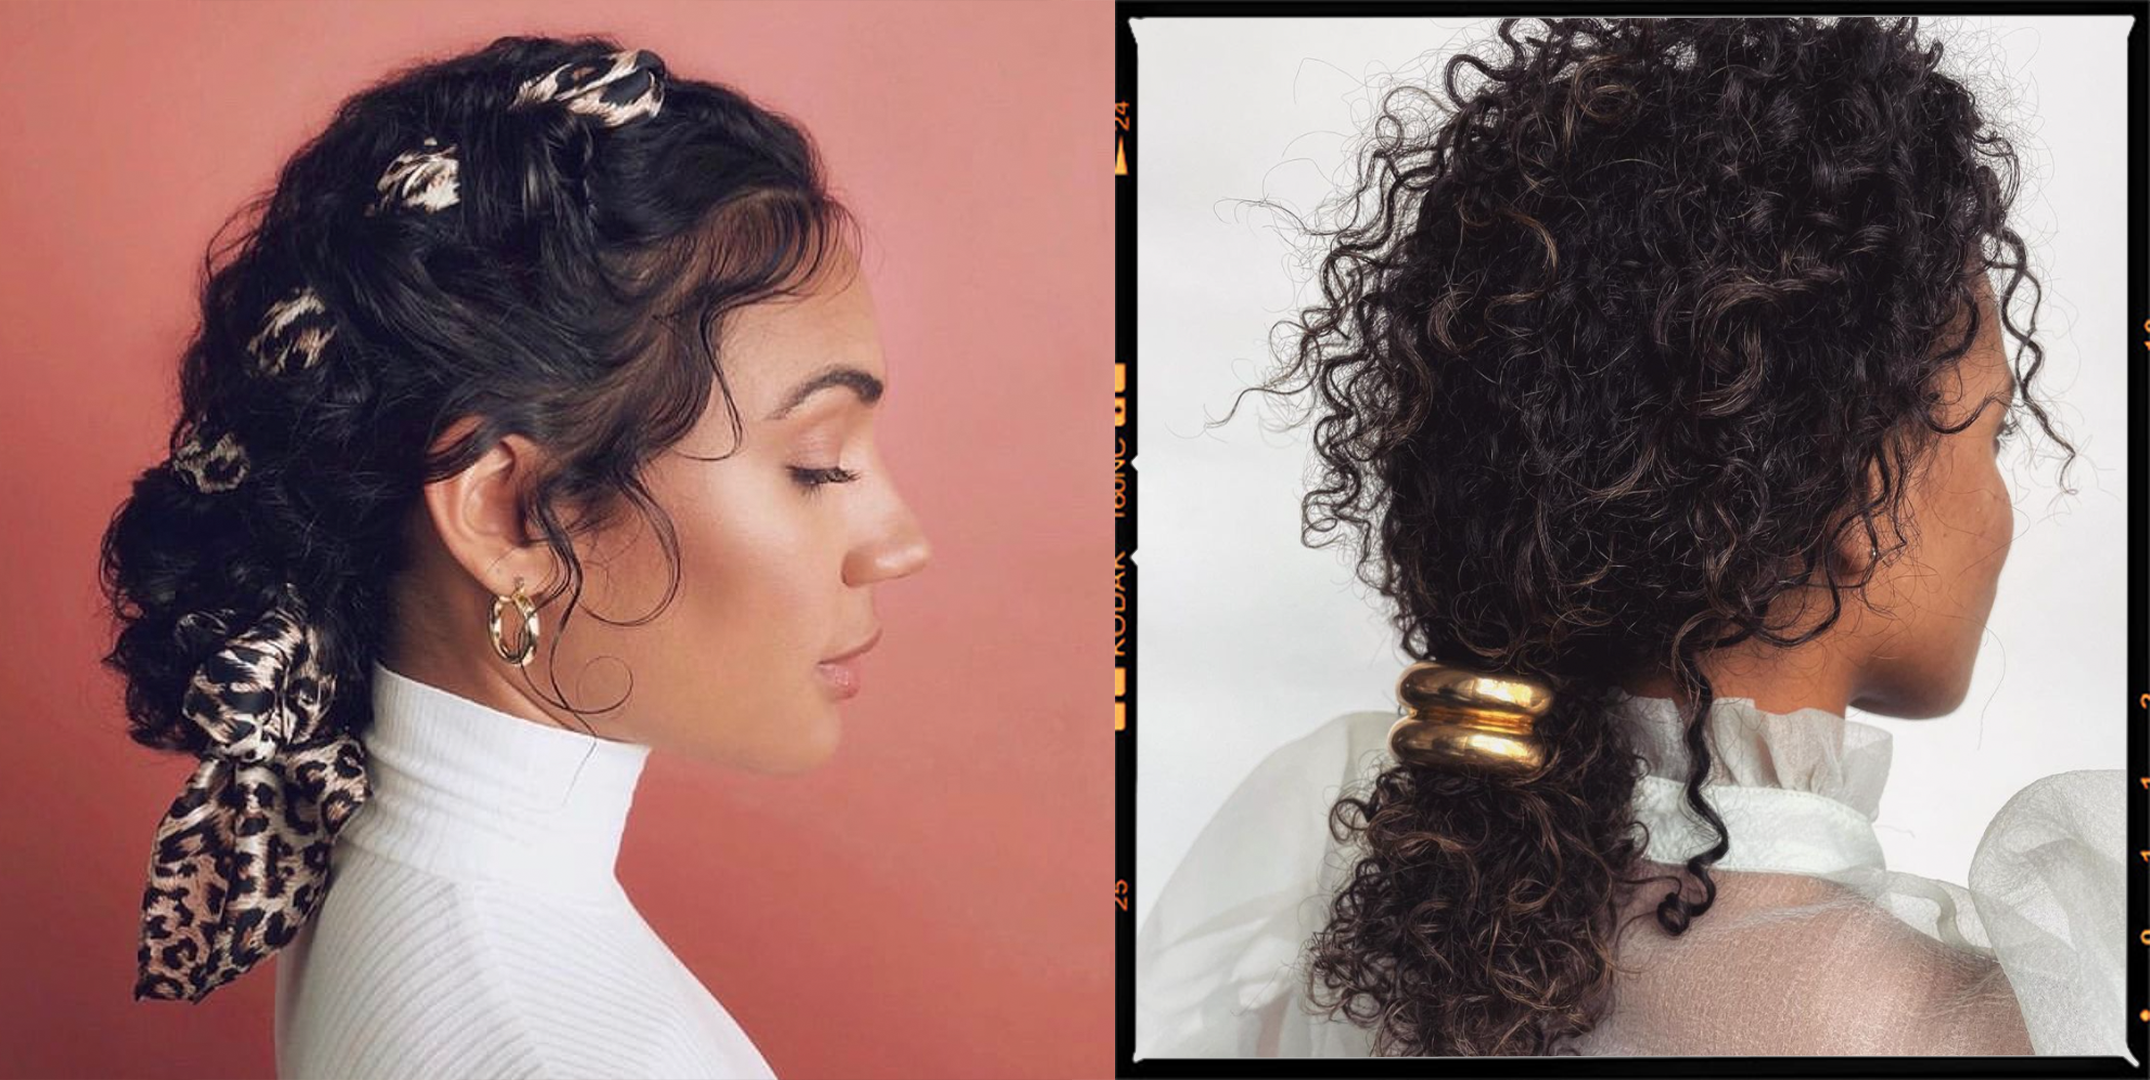 Kinky Curly Hair: 25 Hairstyle Ideas for Your Curls | All Things Hair US